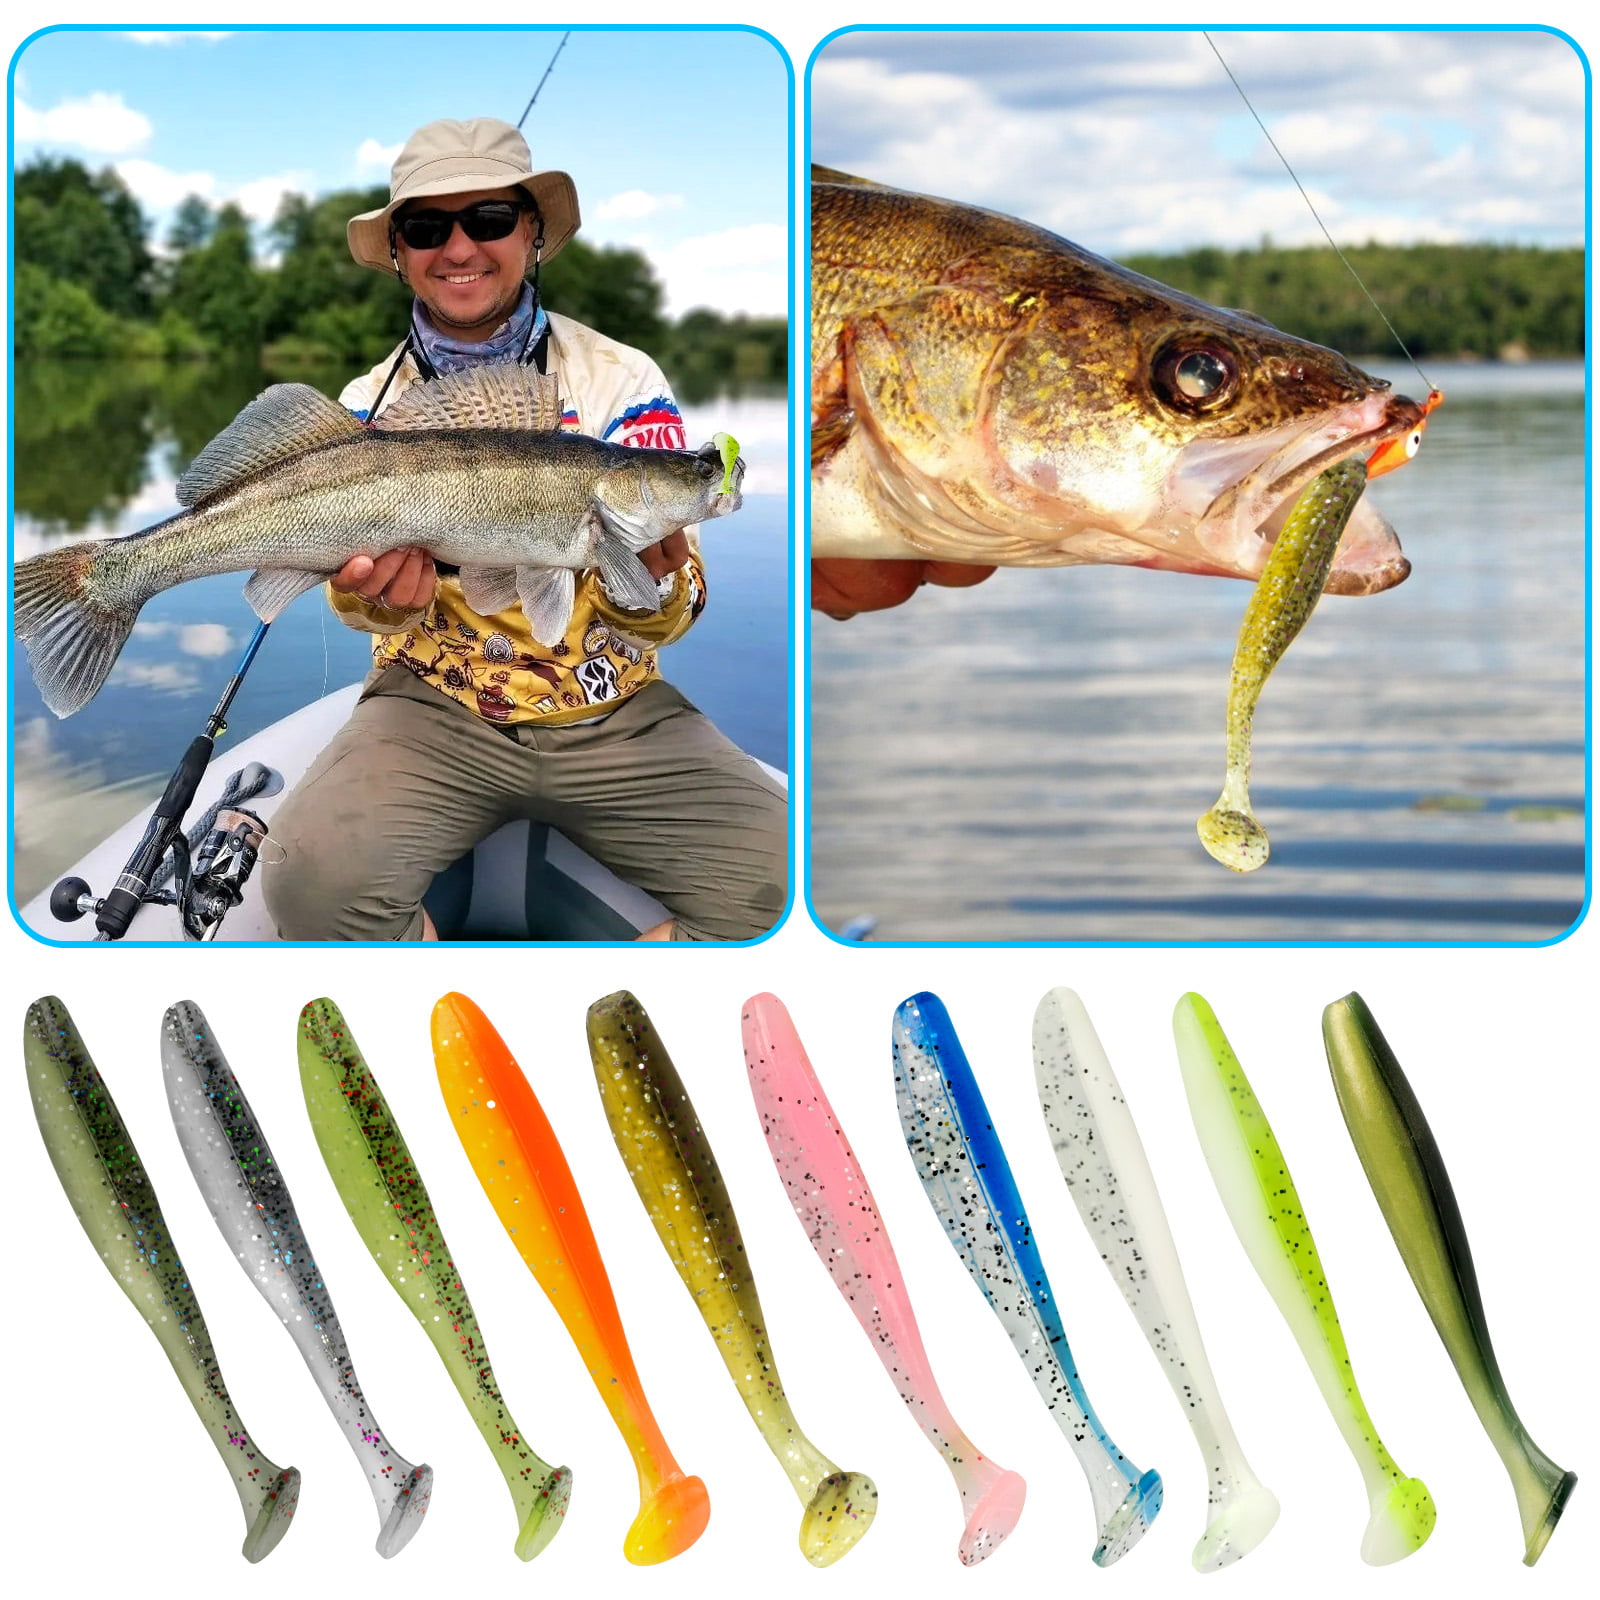 Soft Plastic Lures 2'' Crappie Tubes 50 PK GRUB Lure JIG Fishing SHAD Glow  Green Chartreuse FISHING LURES BAITS